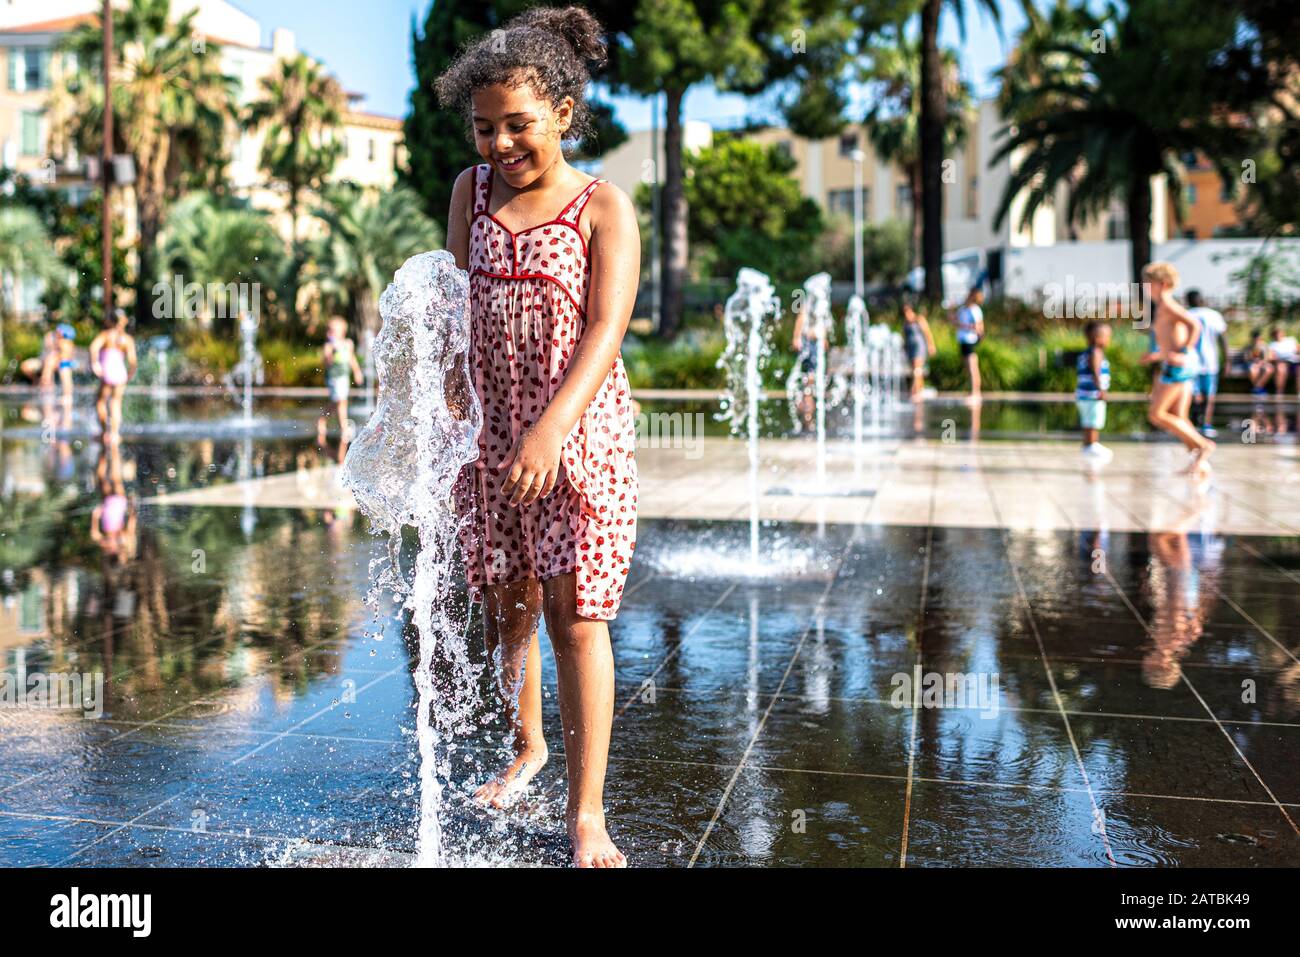 Child is having fun with one of the water jet that are in the Mirroir d’eau on the new urban place, the Promenade du Paillon in Nice, France Stock Photo